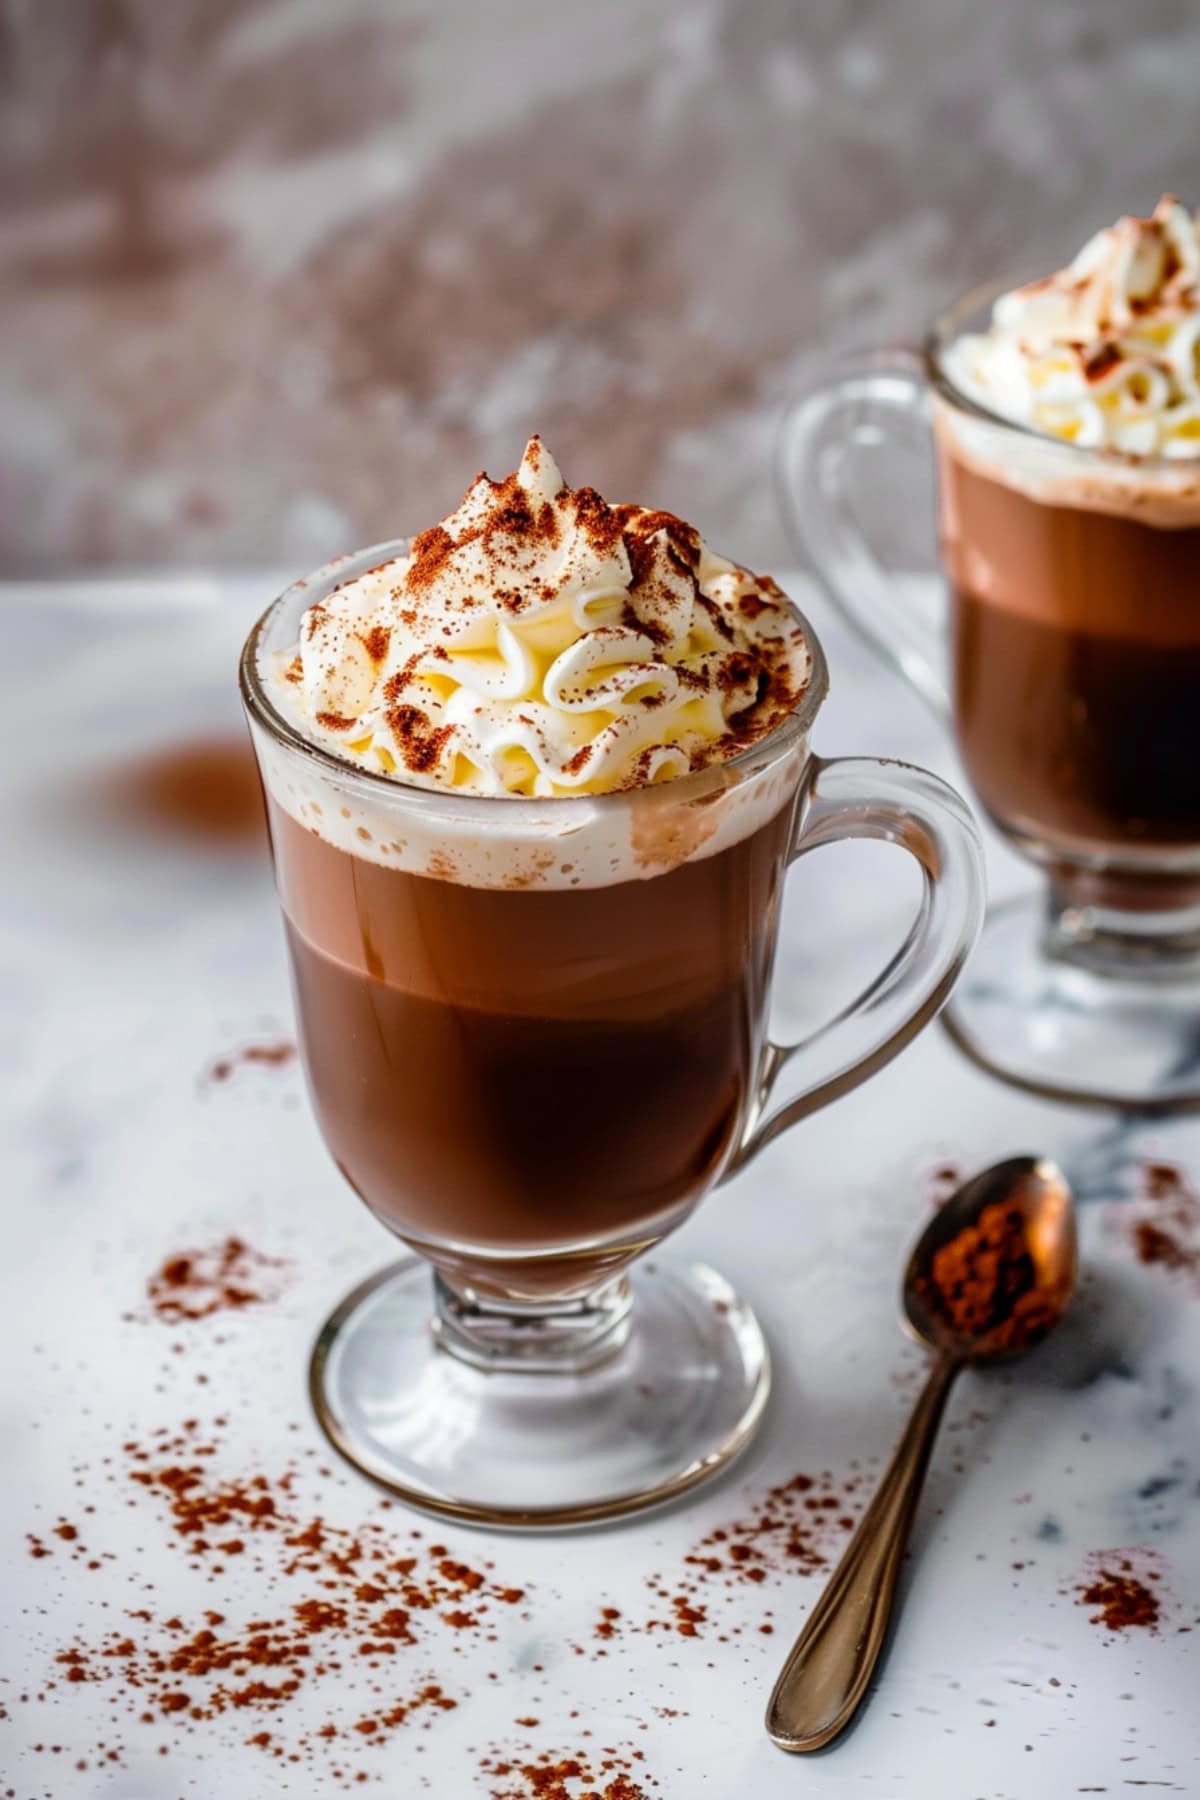 Homemade Kahlua hot chocolate with whipped cream with powdered cocoa